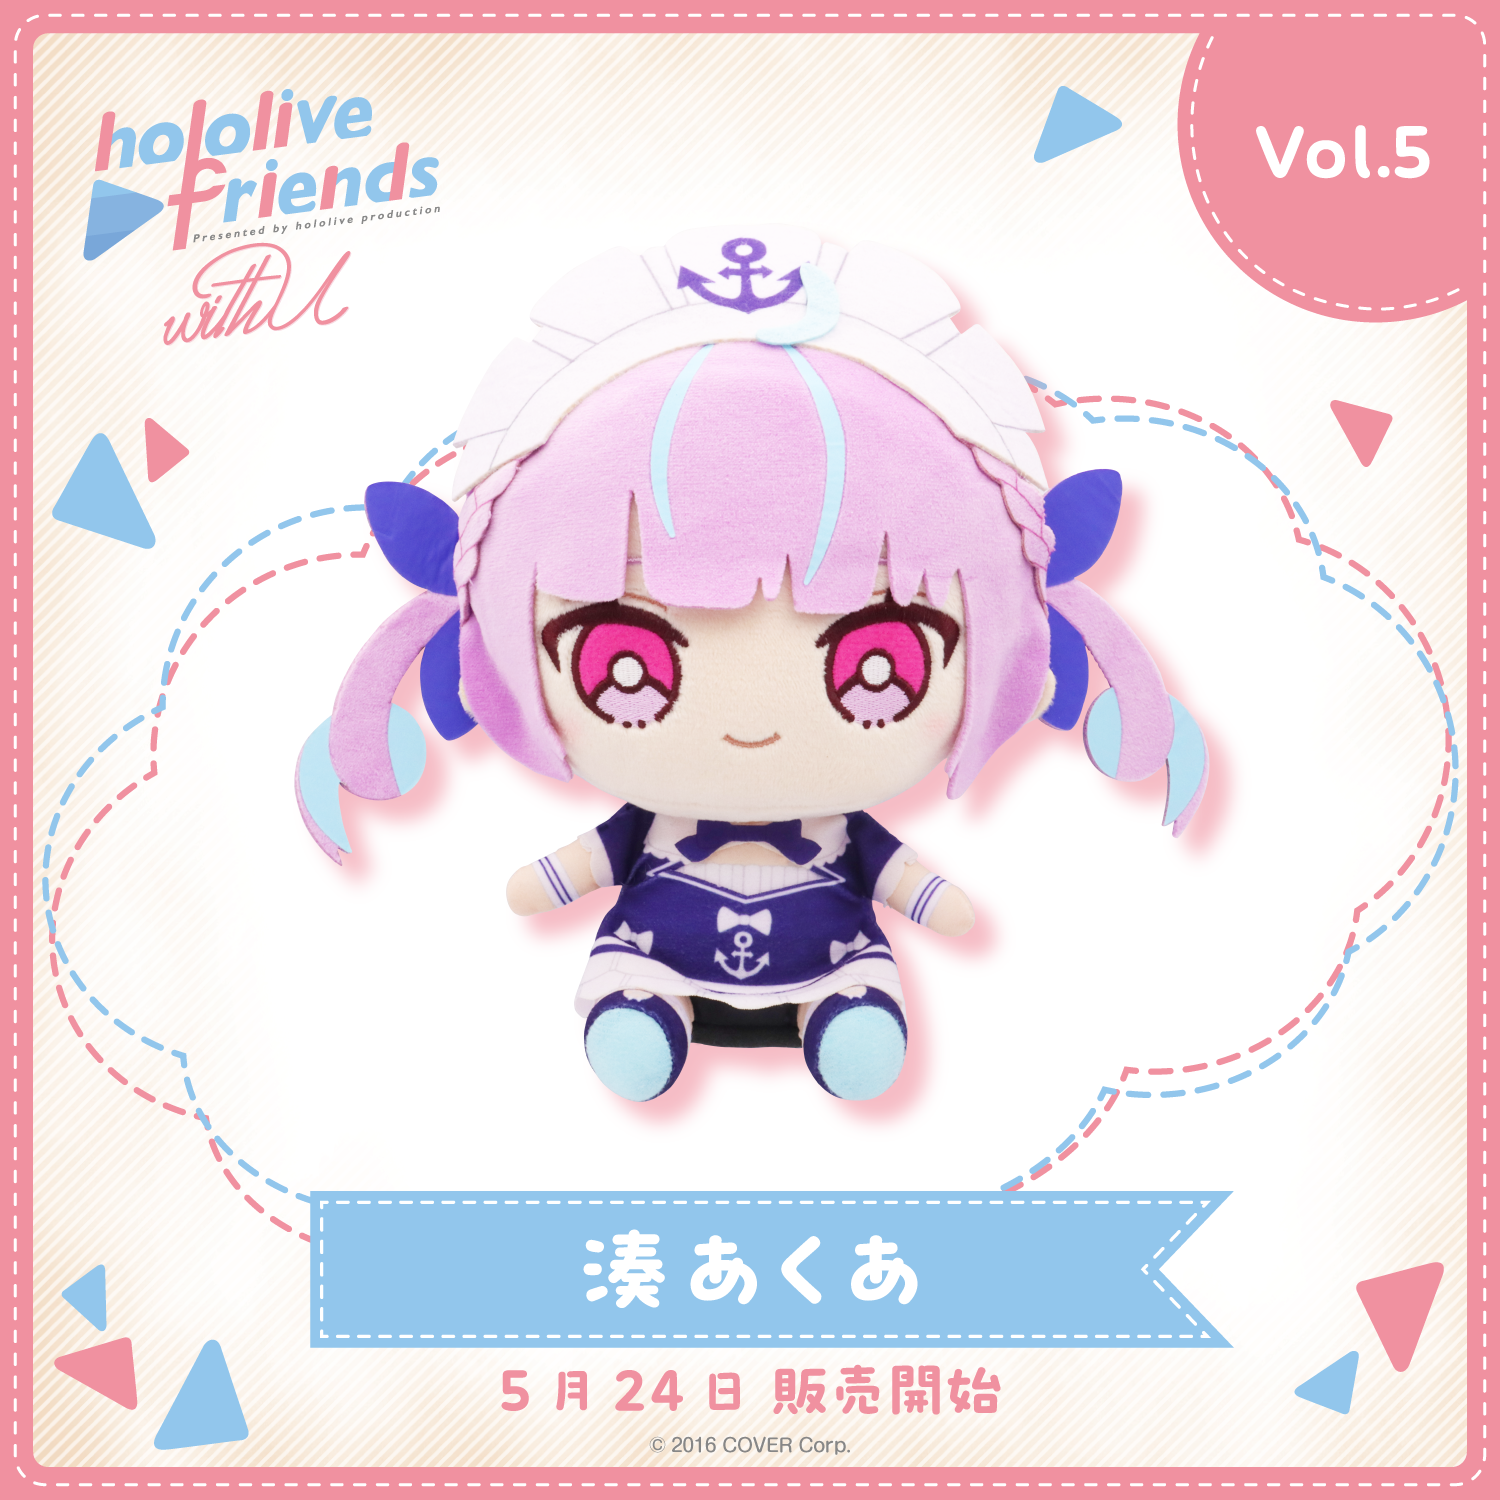 hololive friends with u 湊あくあ – hololive production official shop